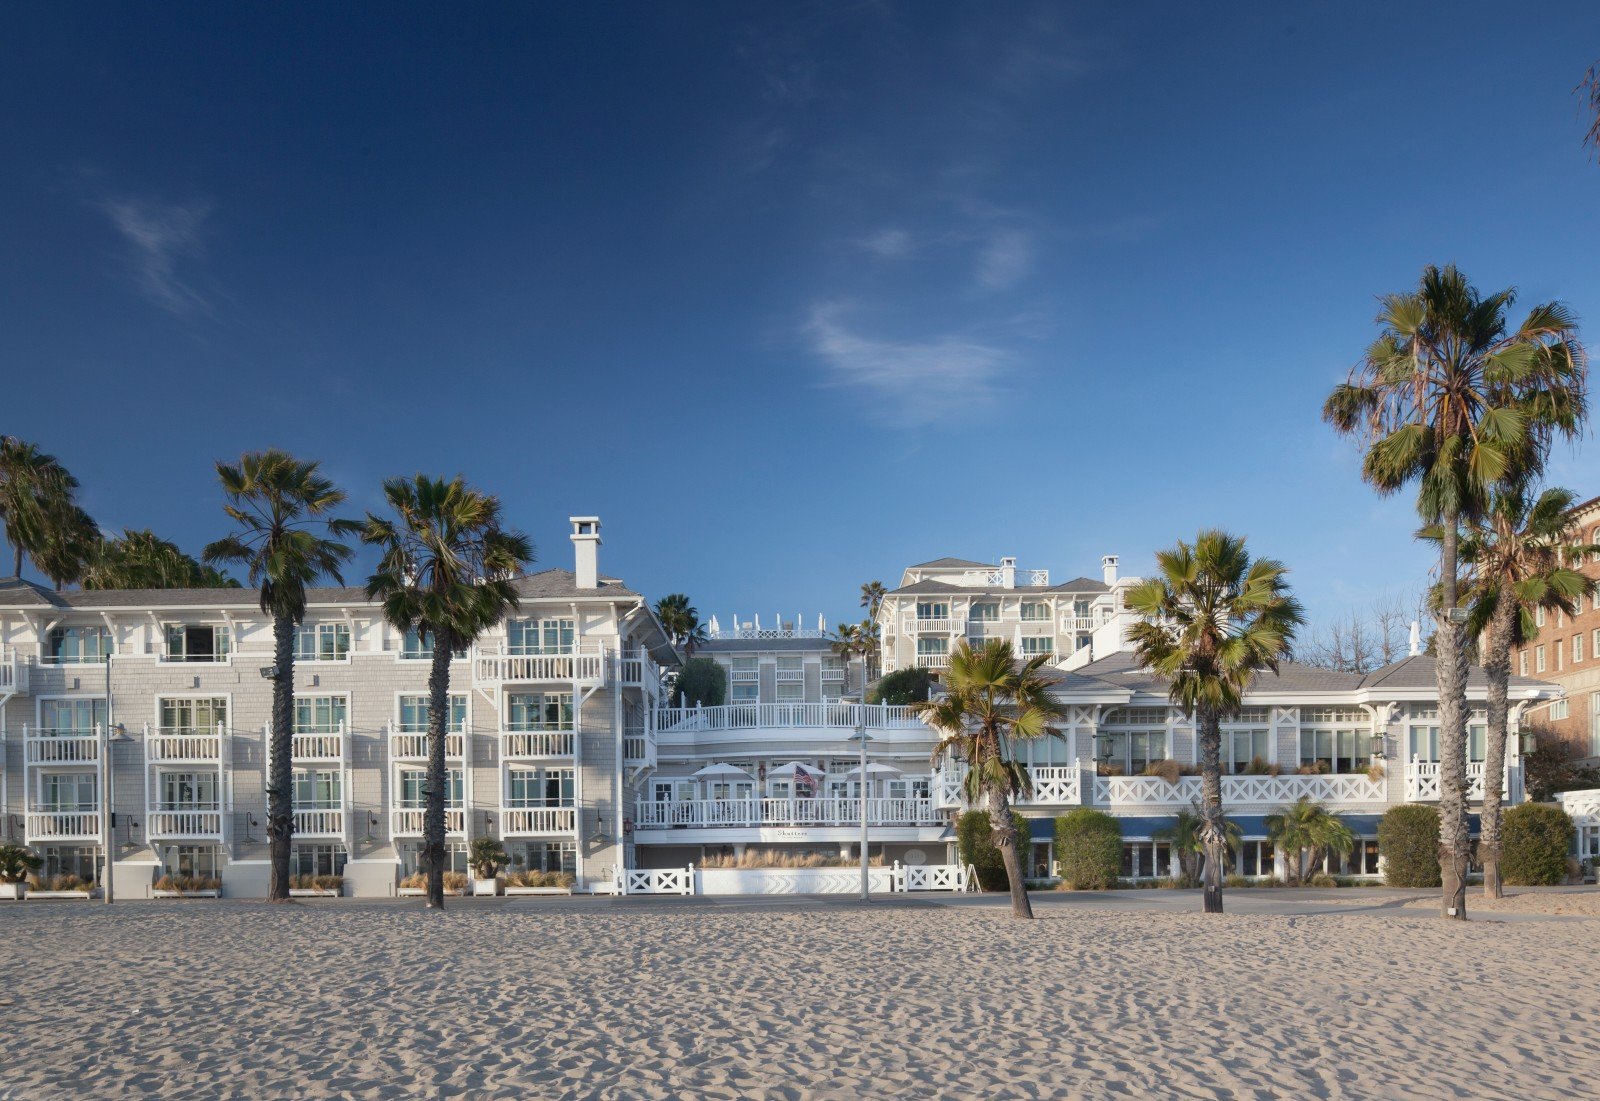 A Guide To Santa Monica's Best Hotels